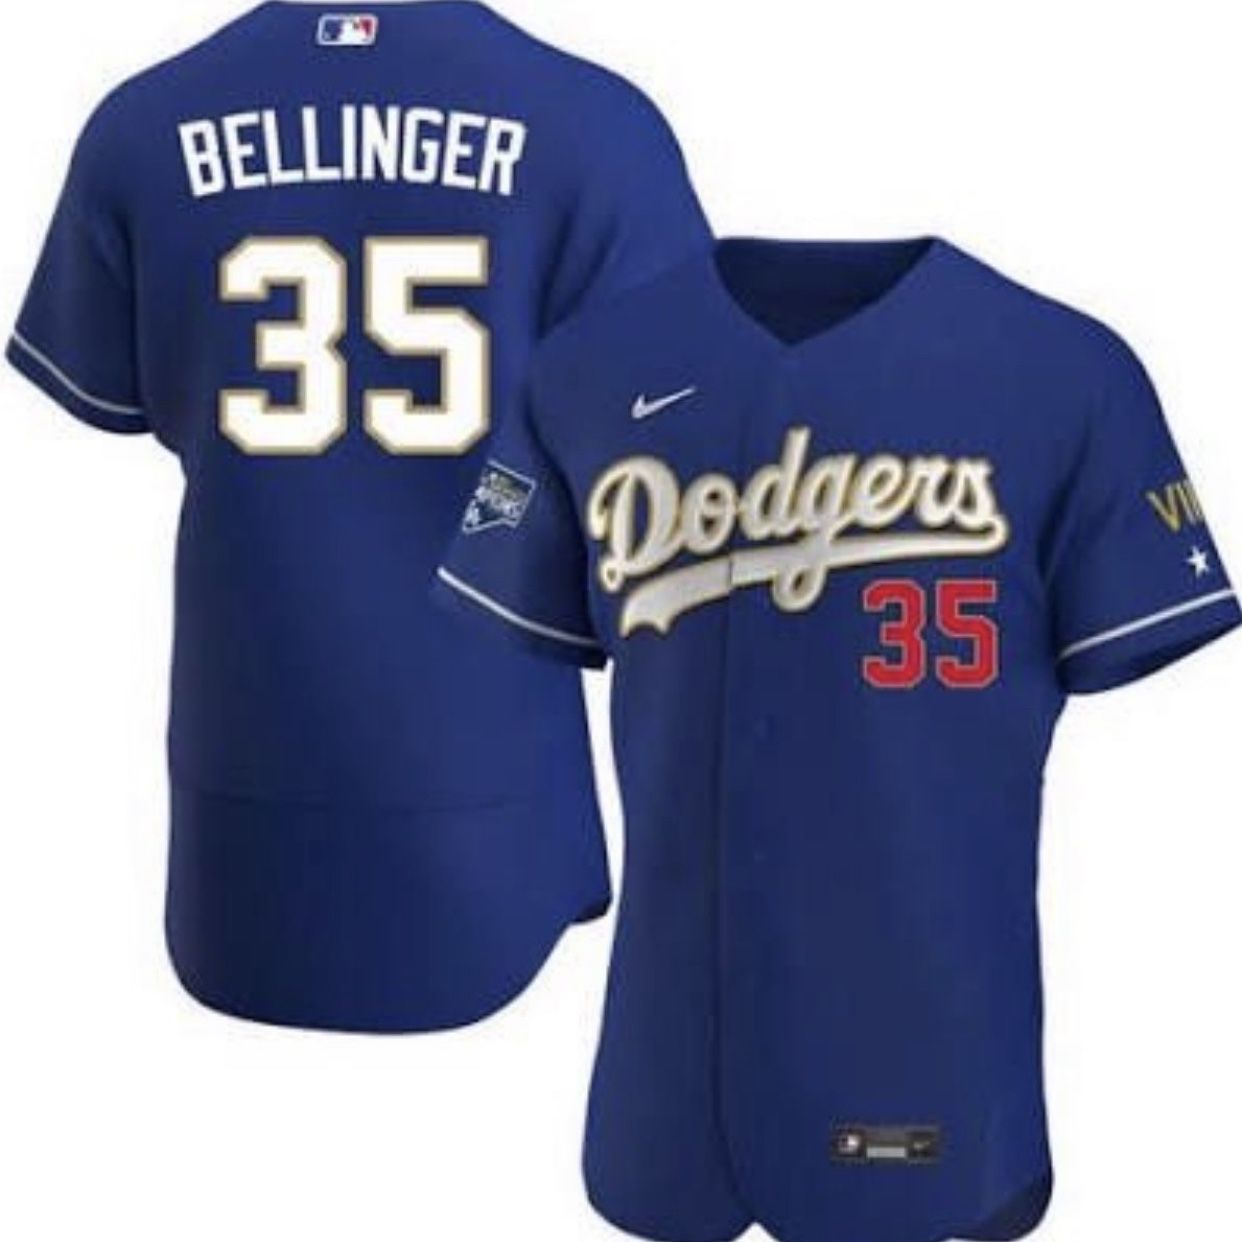 Los Angeles Dodgers Cody Bellinger #35 Blue Nike Gold Edition Opening Day Mens Jersey With Lasorda And Sutton Patches Size In Description 